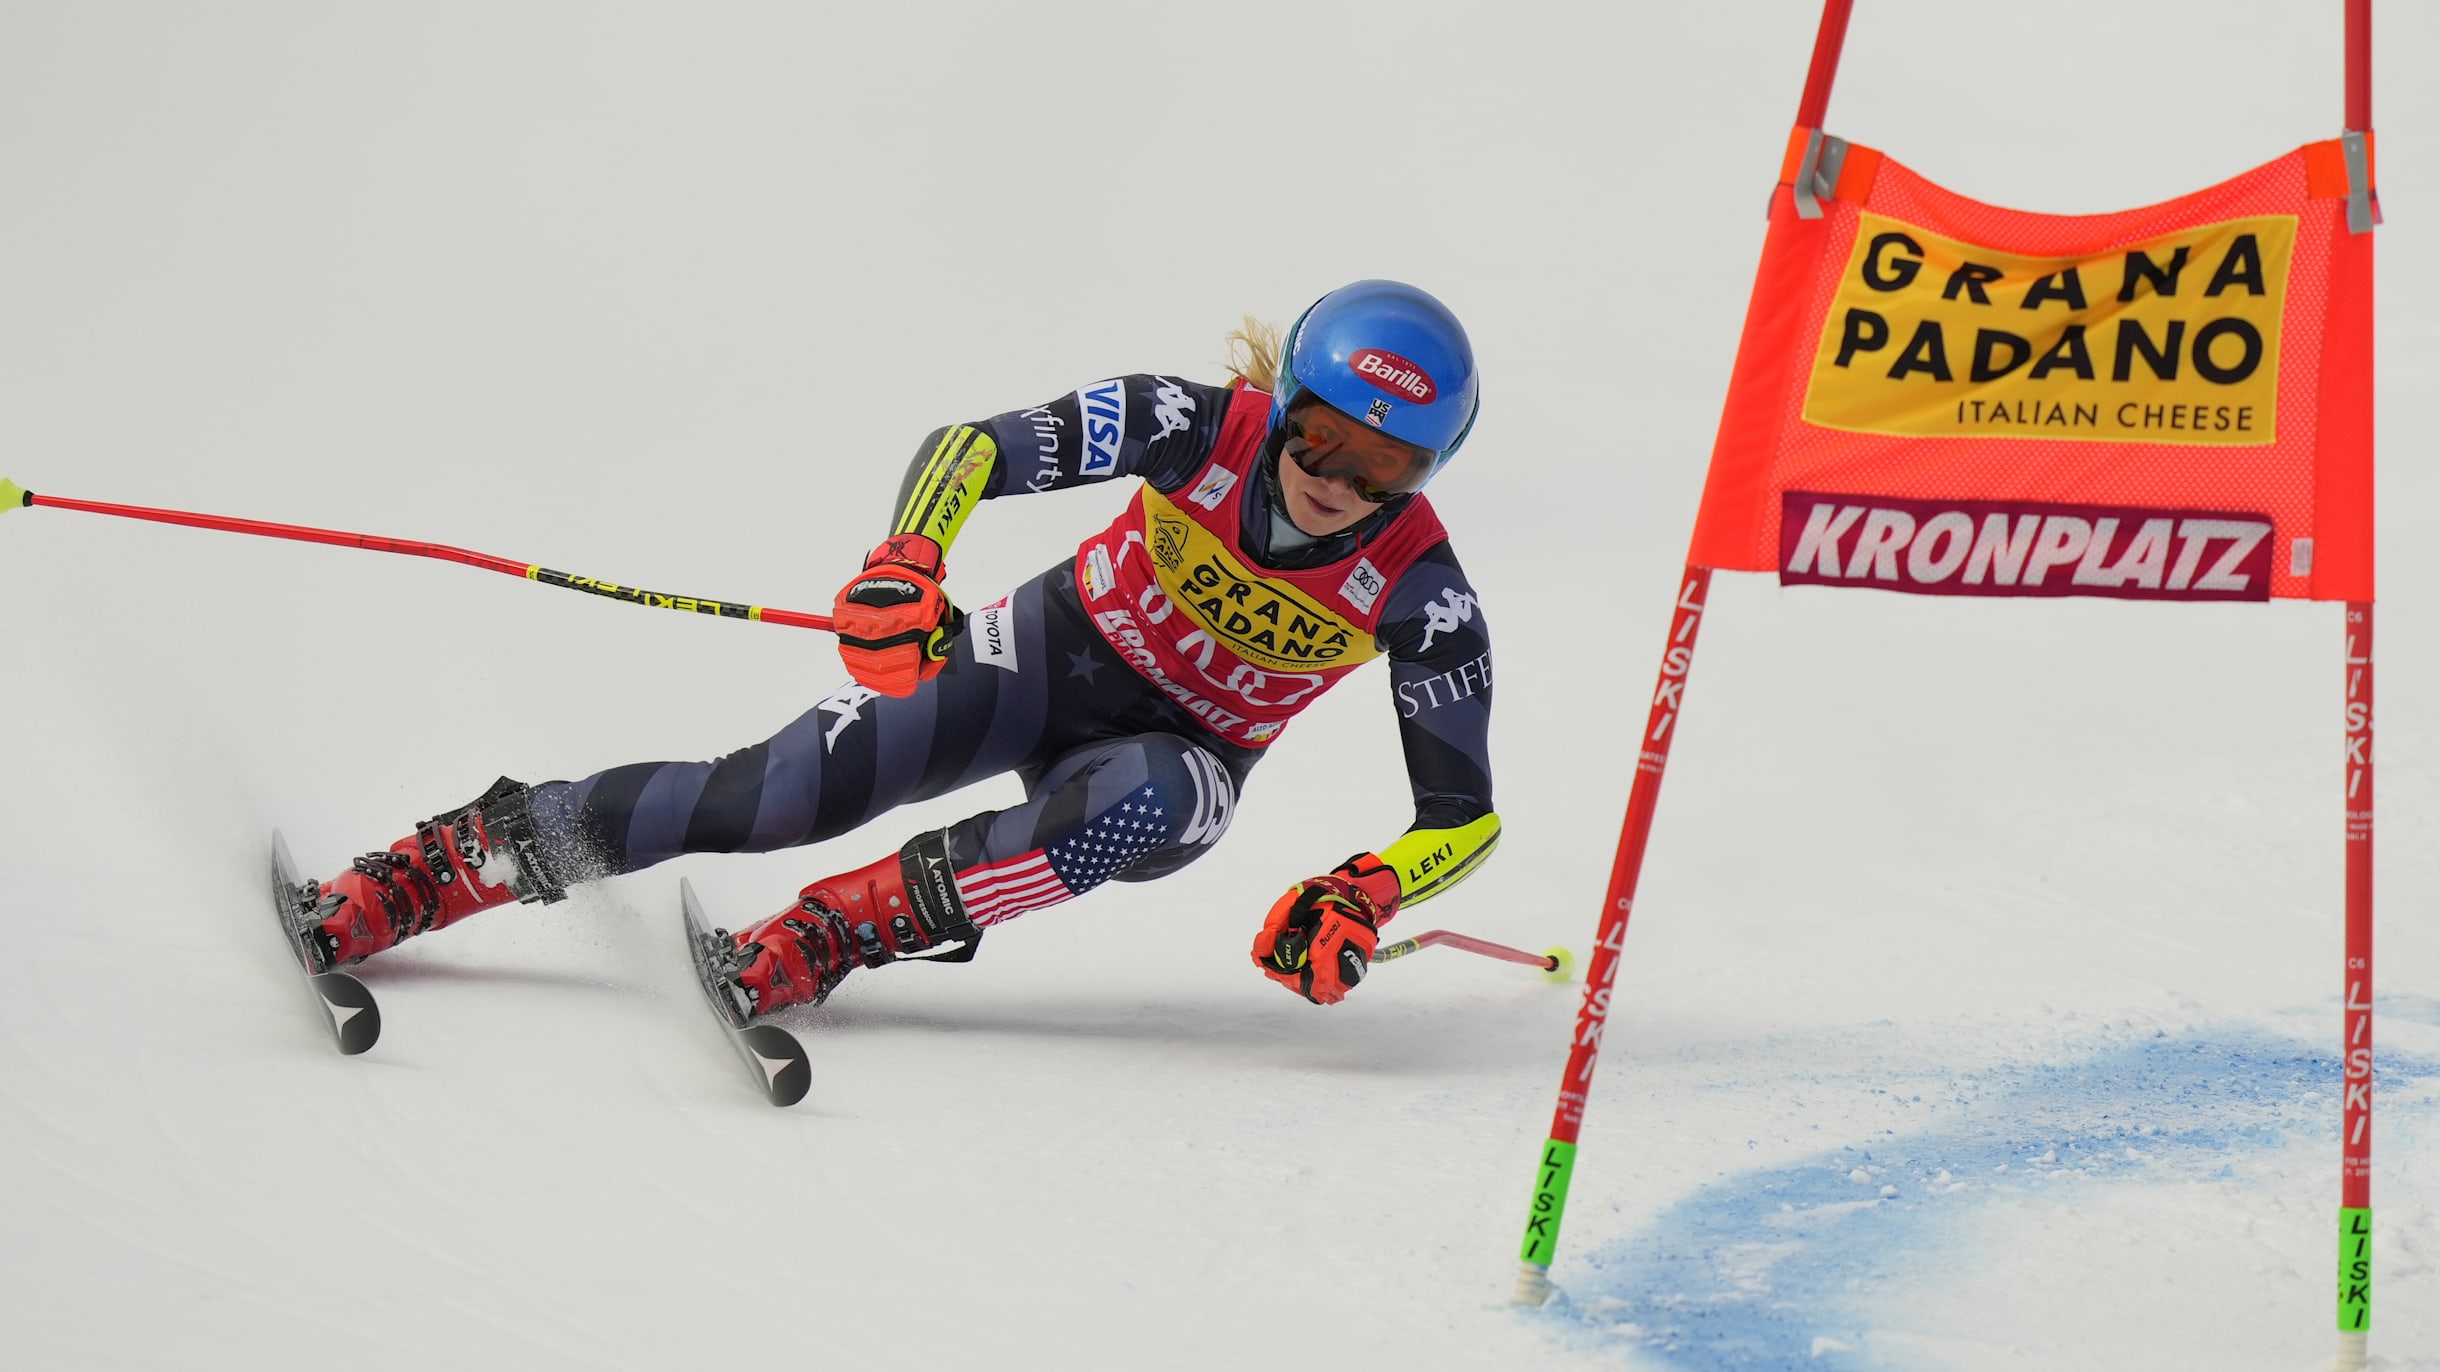 Mikaela Shiffrin continues Alpine Ski World Cup winning form with another Kronplatz giant slalom victory